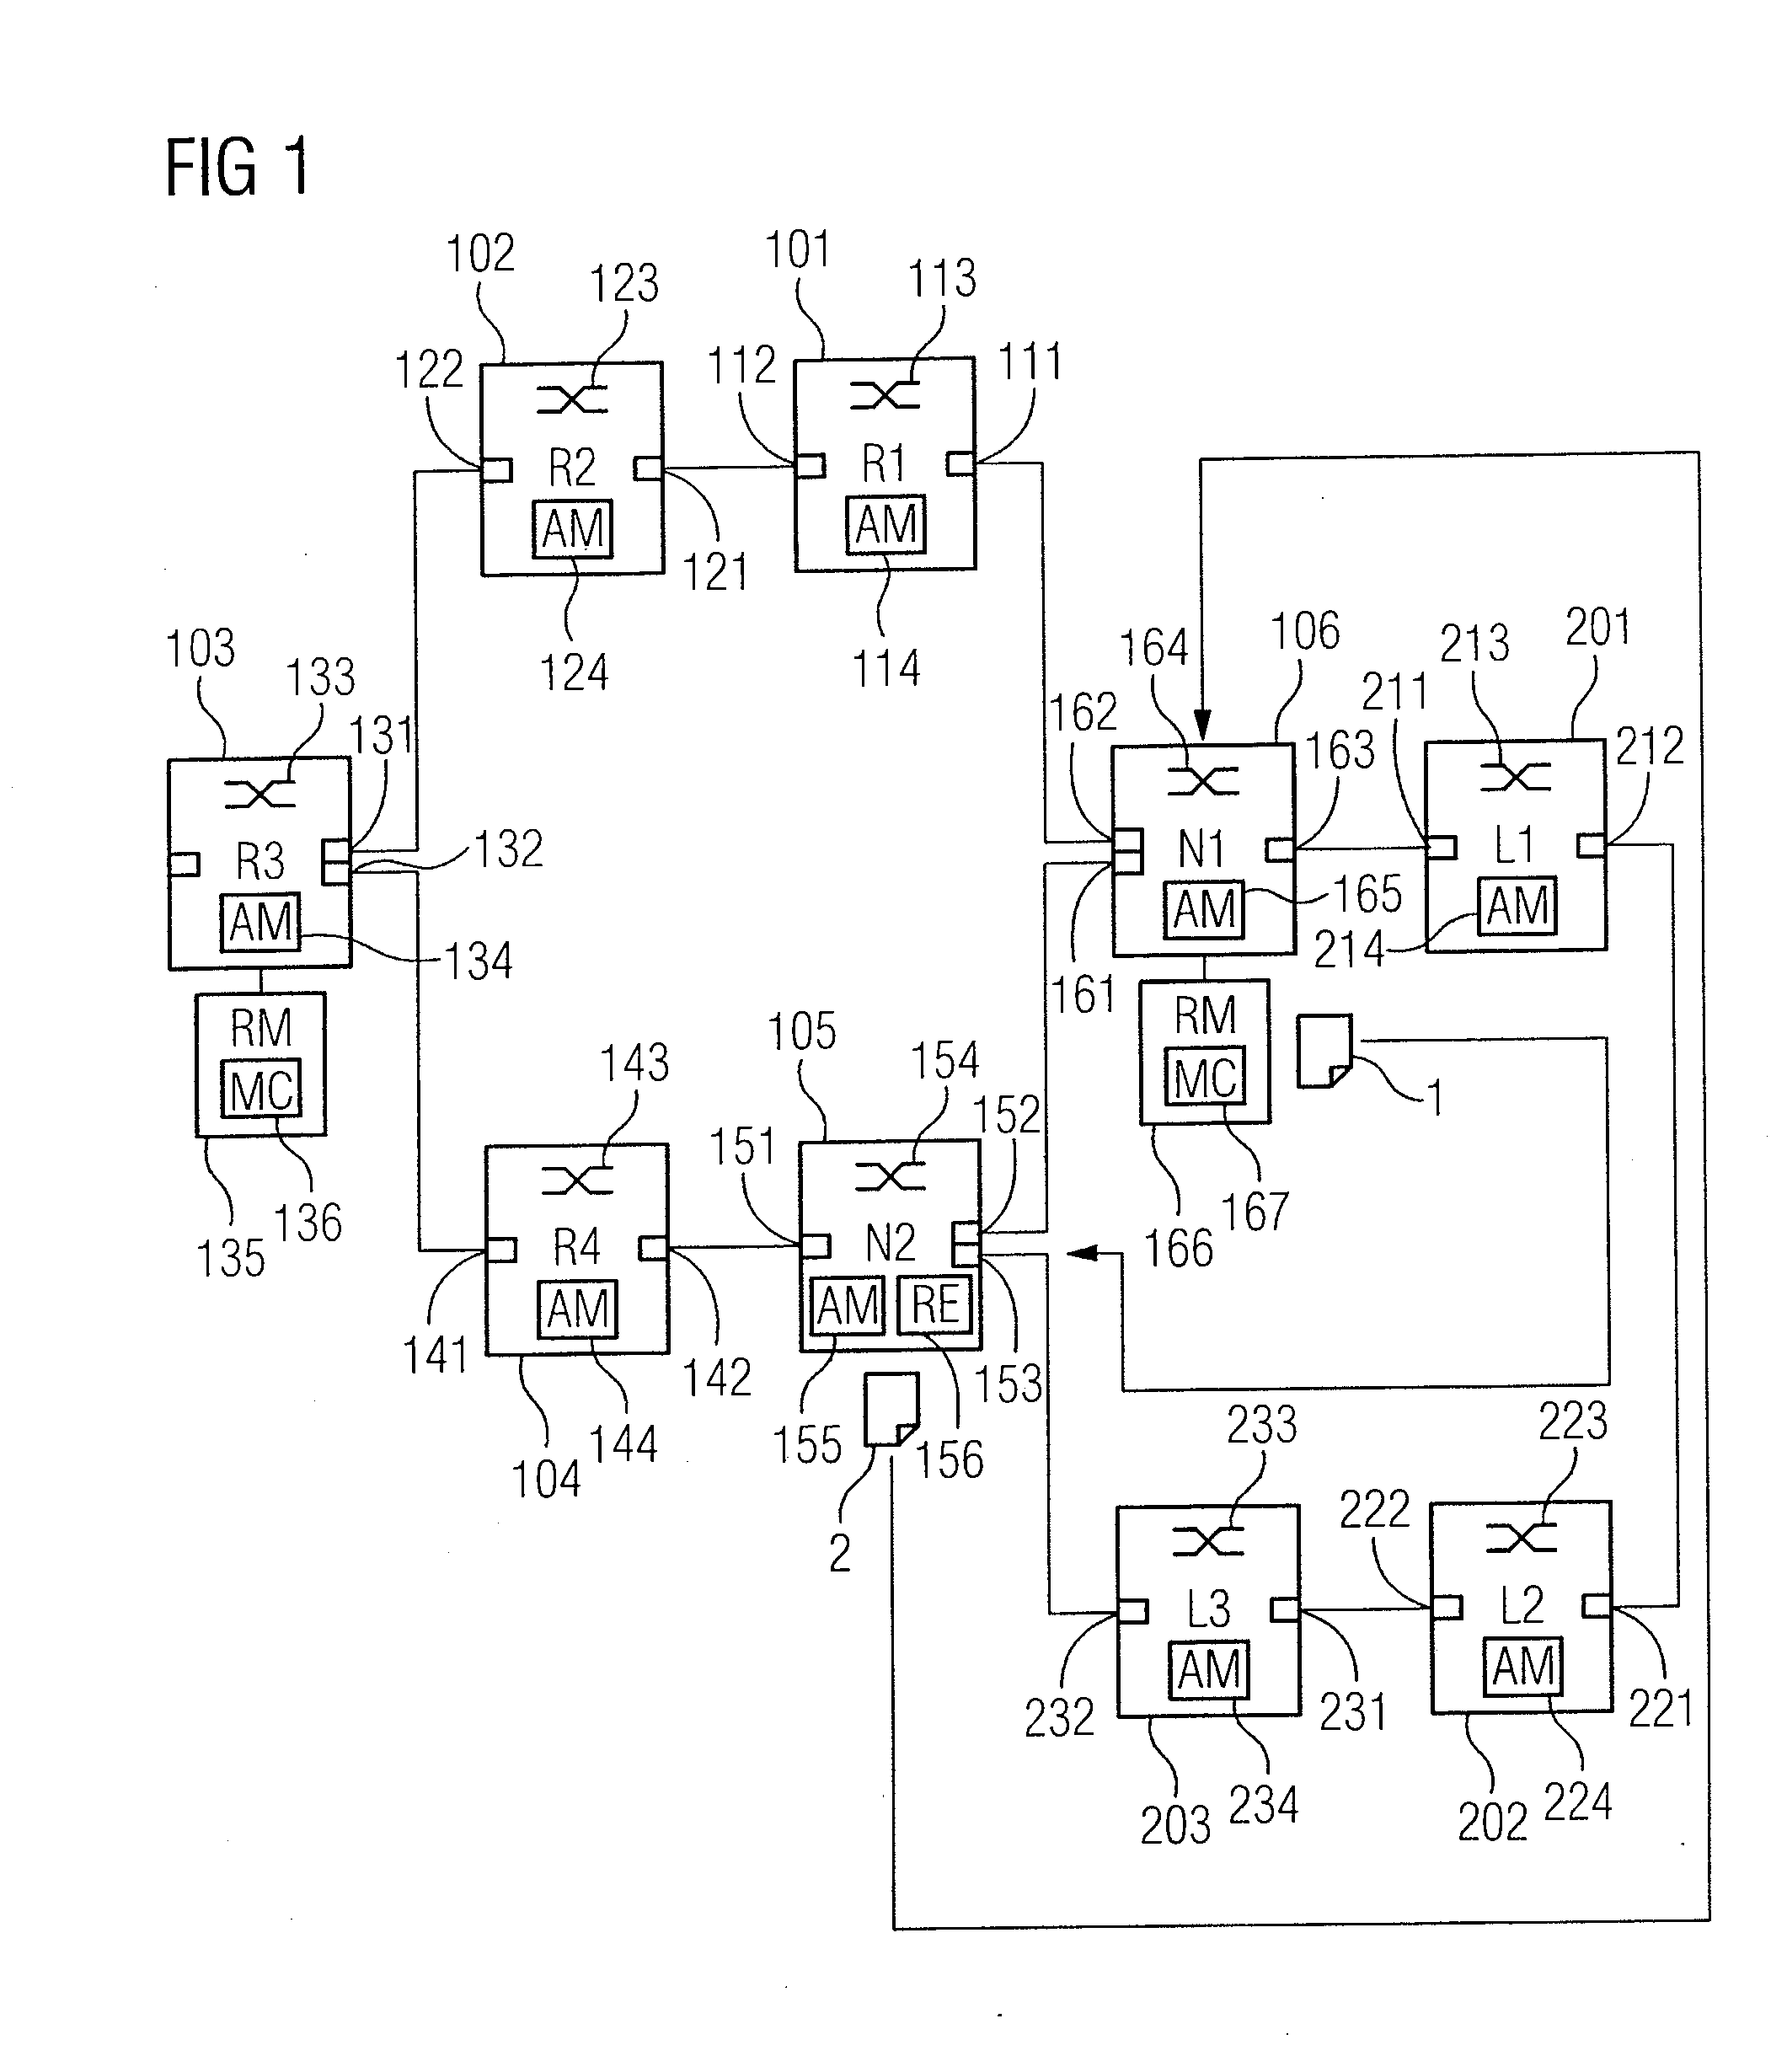 Redundantly operable industrial communication system, communication device and method for redundantly operating an industrial communication system